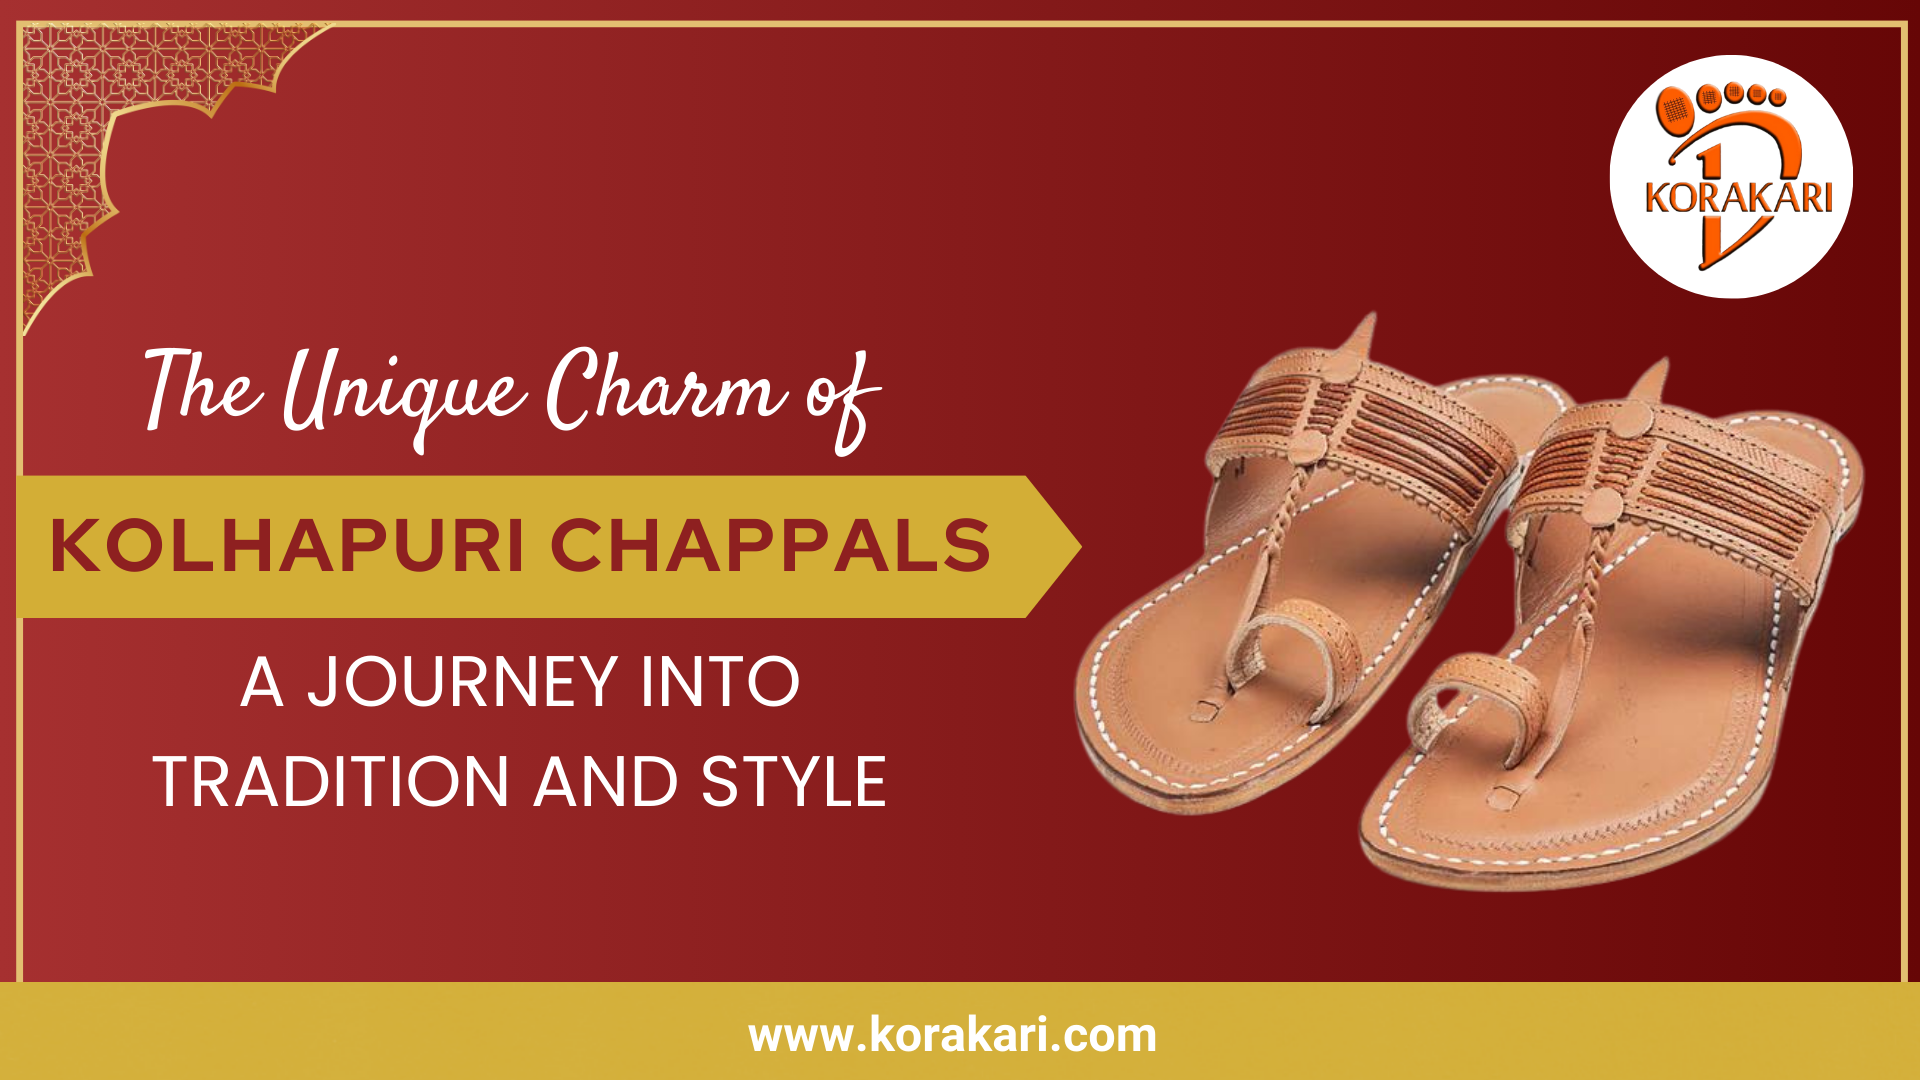 The Unique Charm of Kolhapuri Chappals: A Journey into Tradition and Style